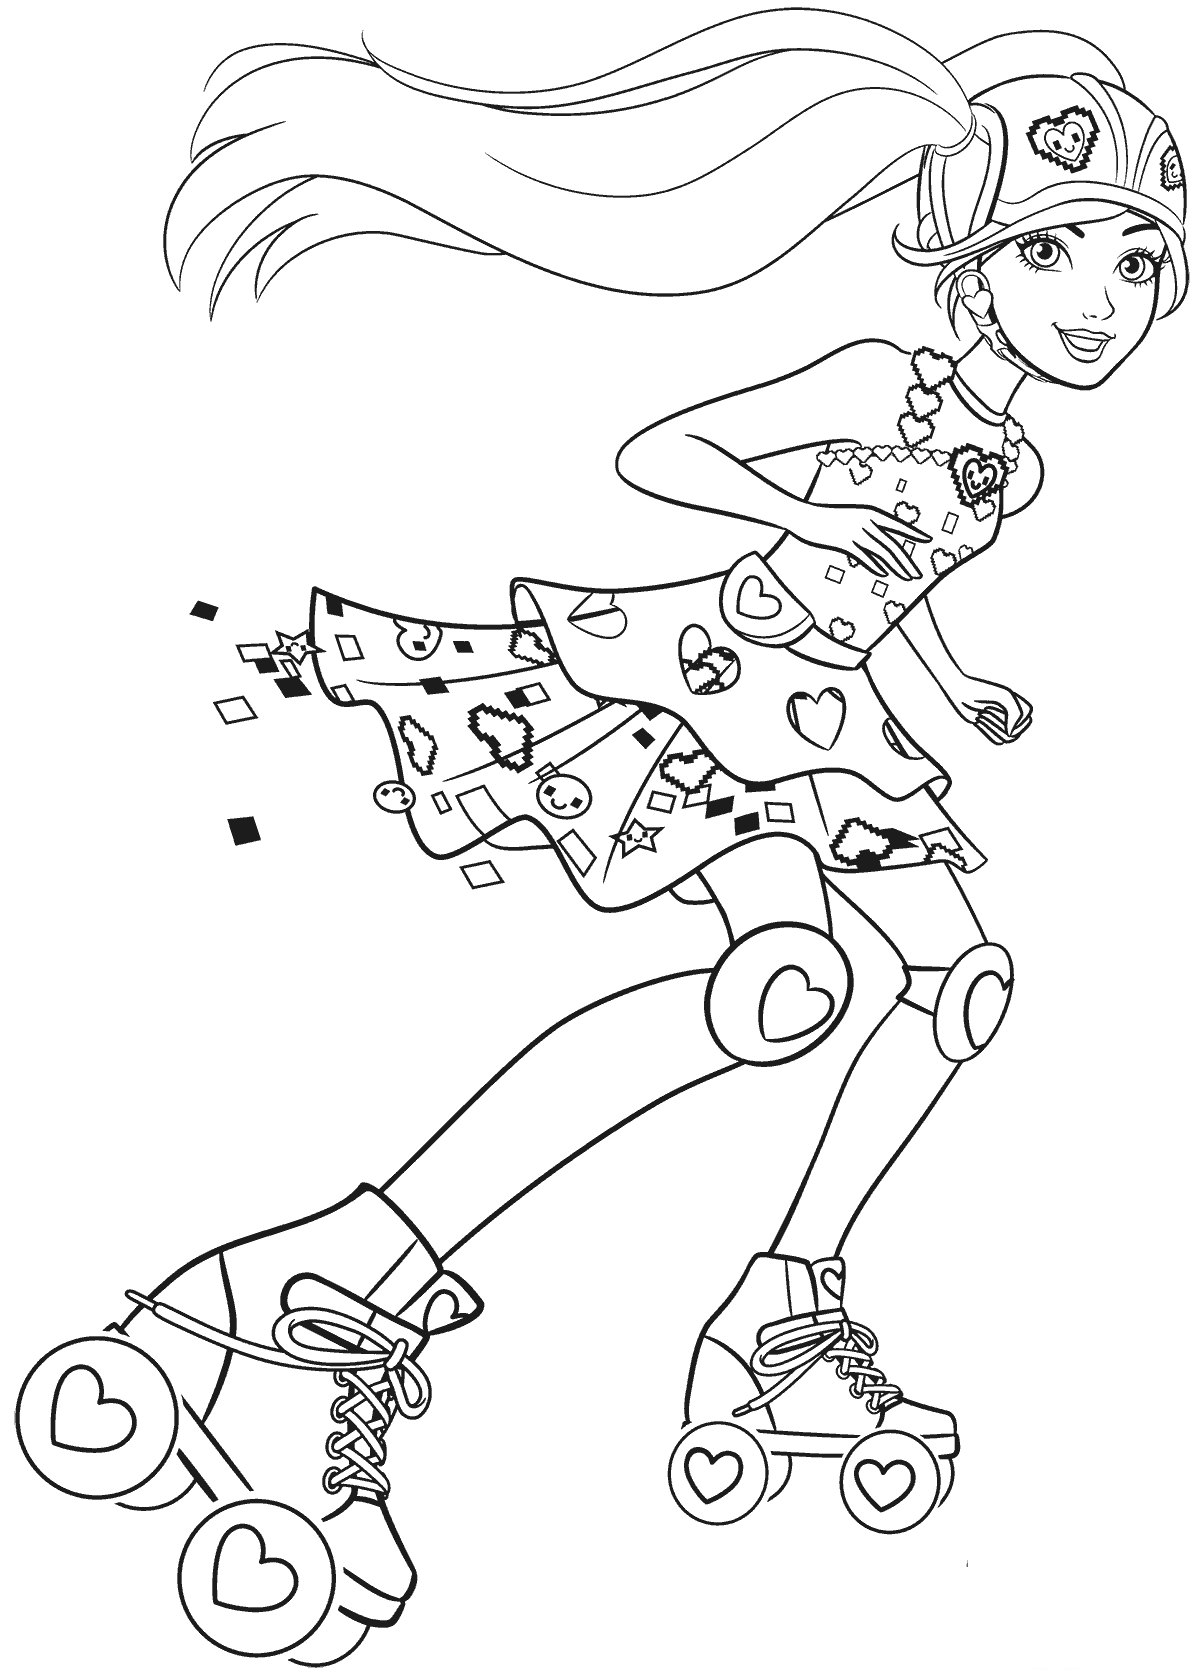 Princess Video Games Coloring Pages   Coloring Cool